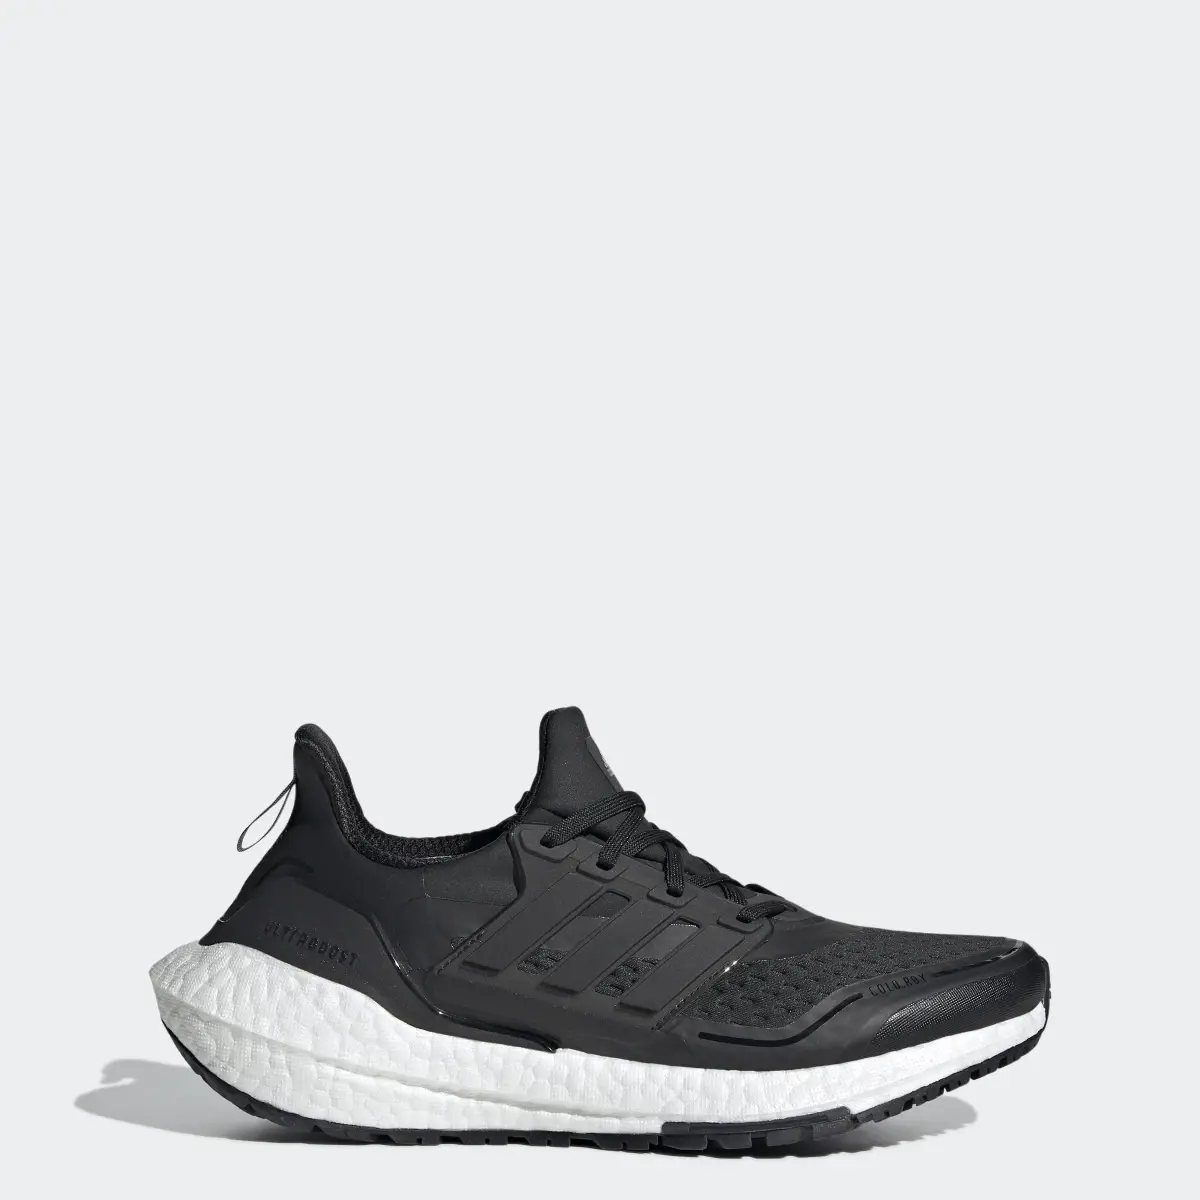 Adidas Ultraboost 21 COLD.RDY Shoes. 1